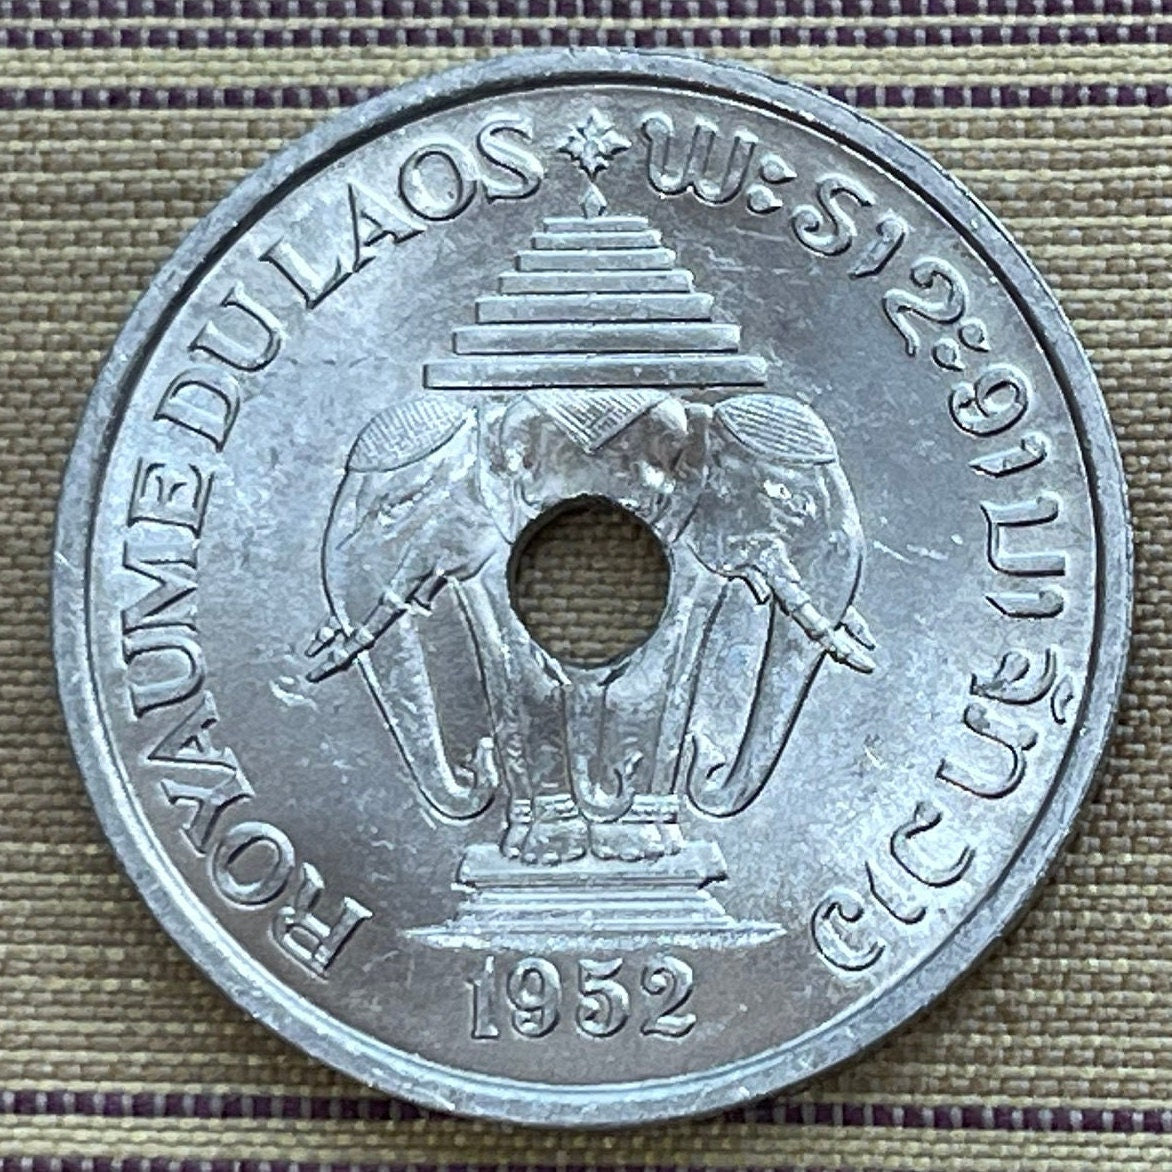 Airavata the 3-Headed White Elephant King 20 Cents Laos Authentic Coin Money for Jewelry (Lotus) (Hole in Coin) (1952) (7-Folded Umbrella)